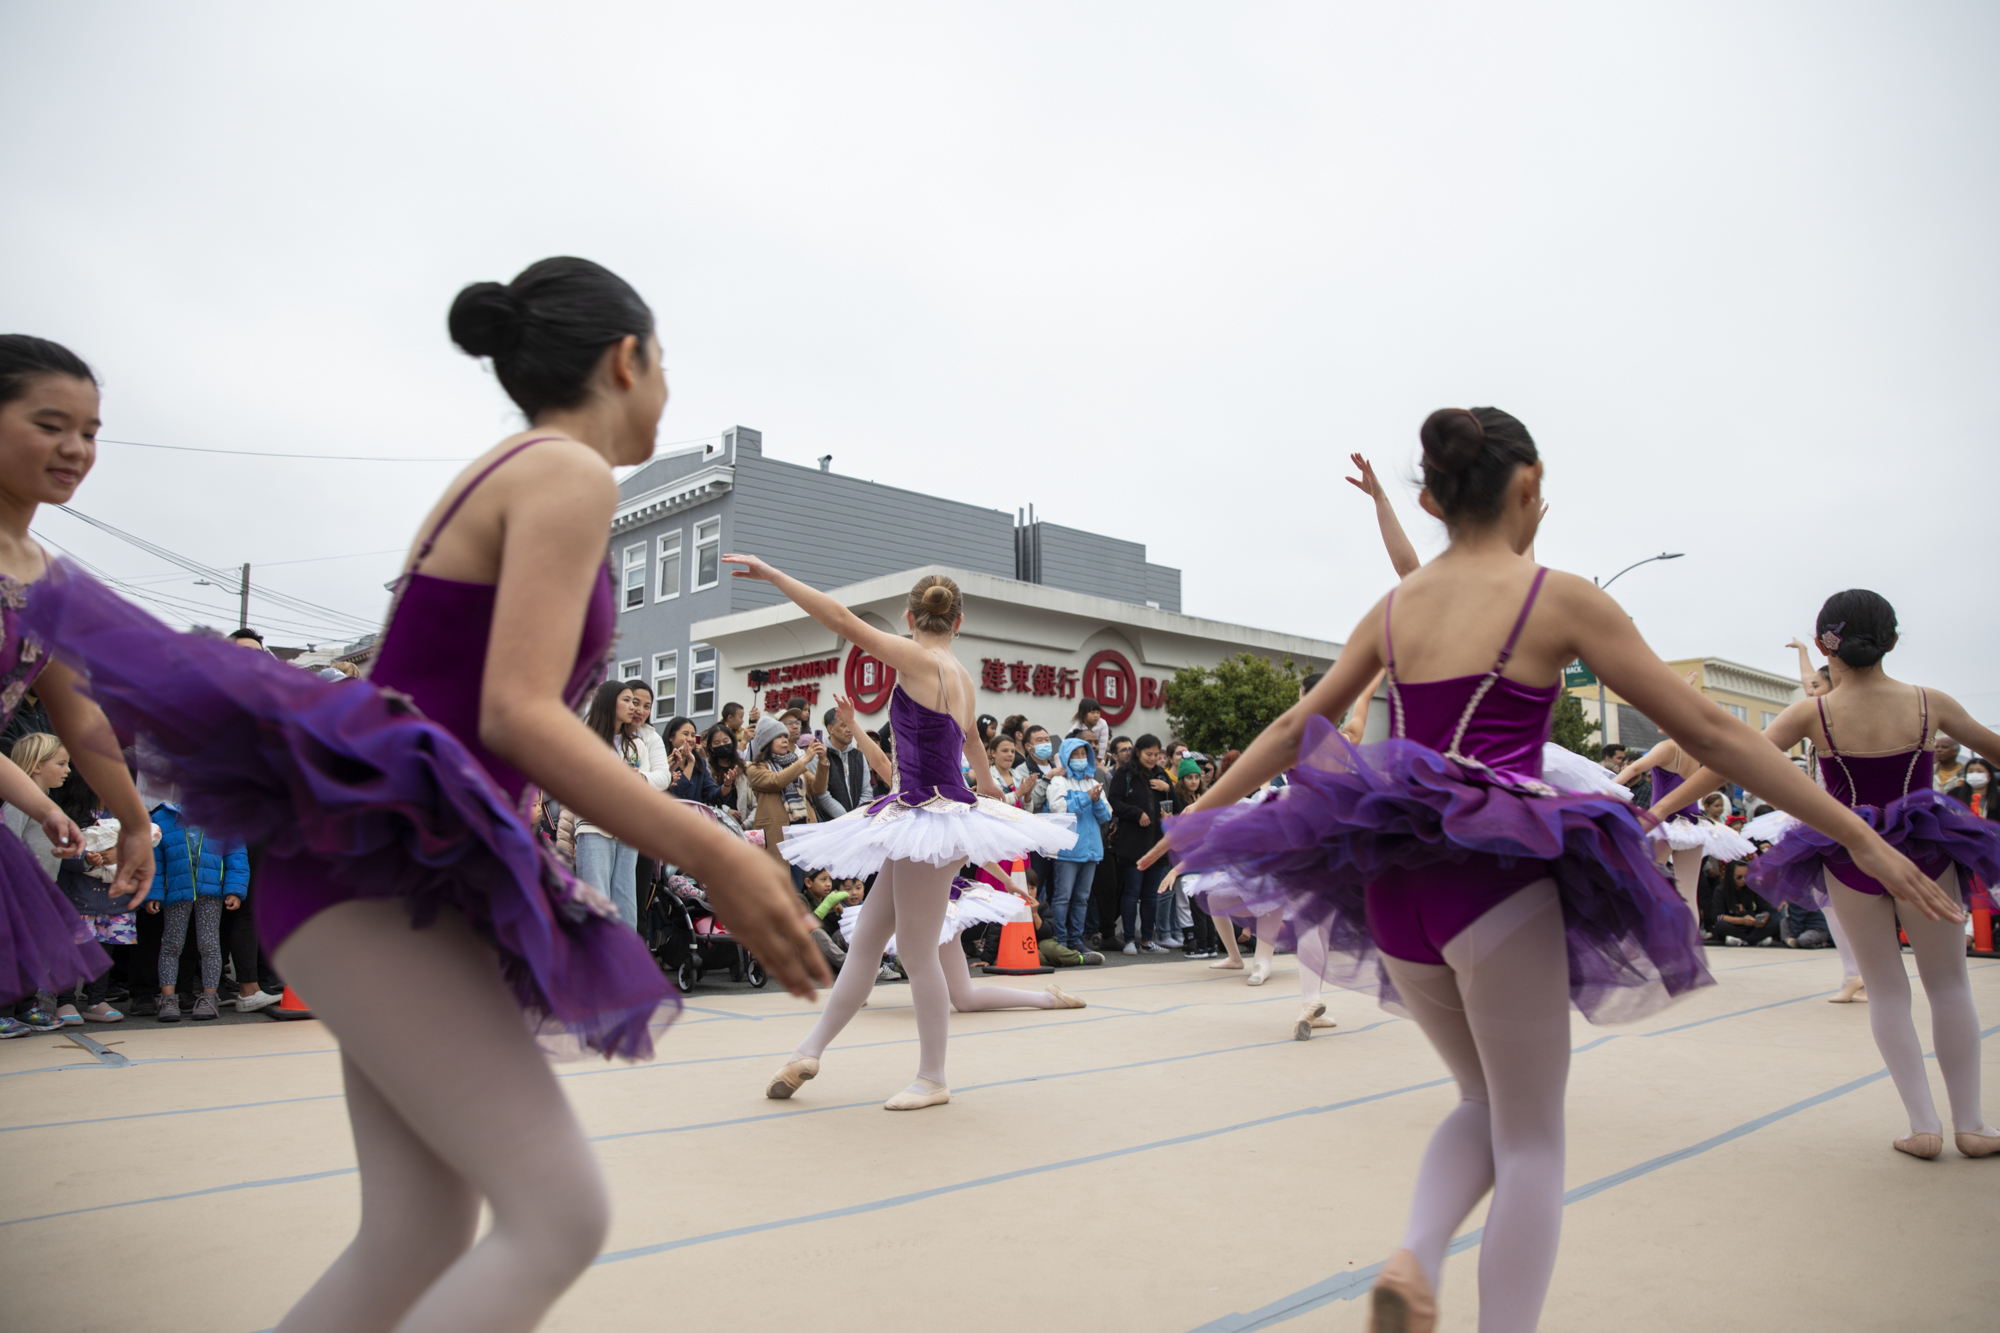 Young people in tutus perform for an audience outdoors.